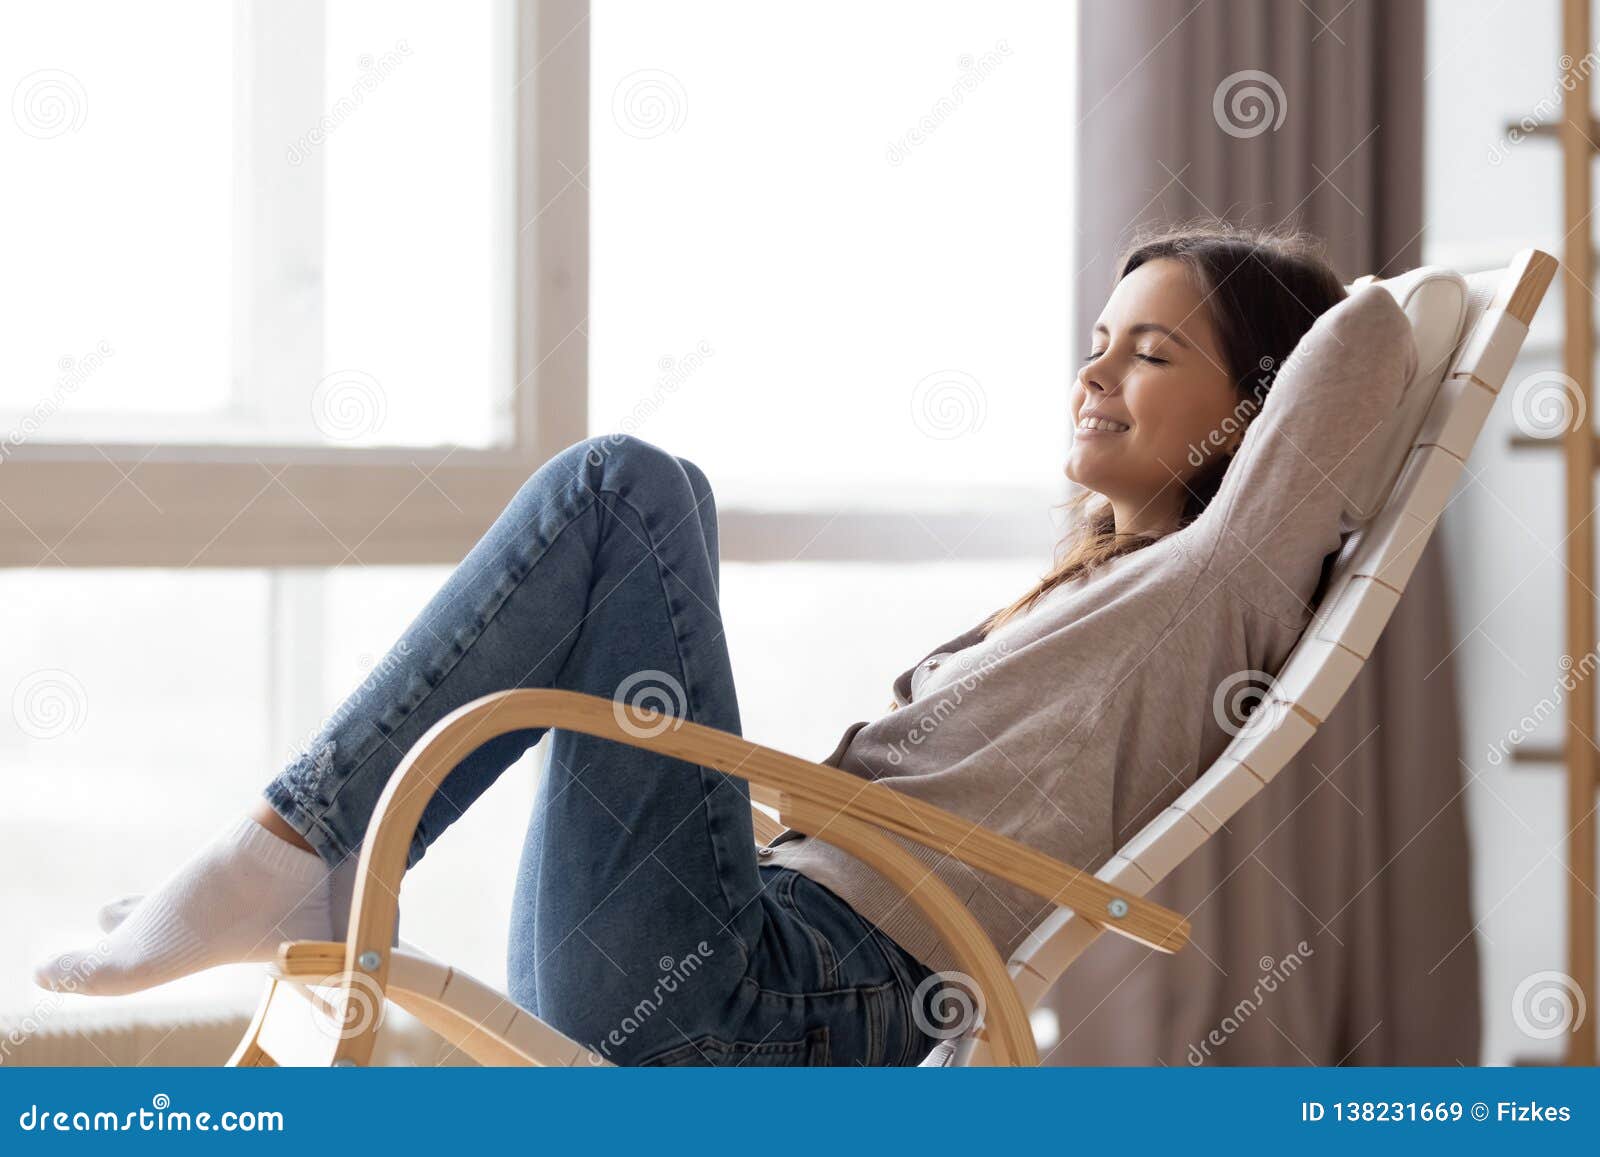 relaxed calm young woman lounging sitting in comfortable rocking chair